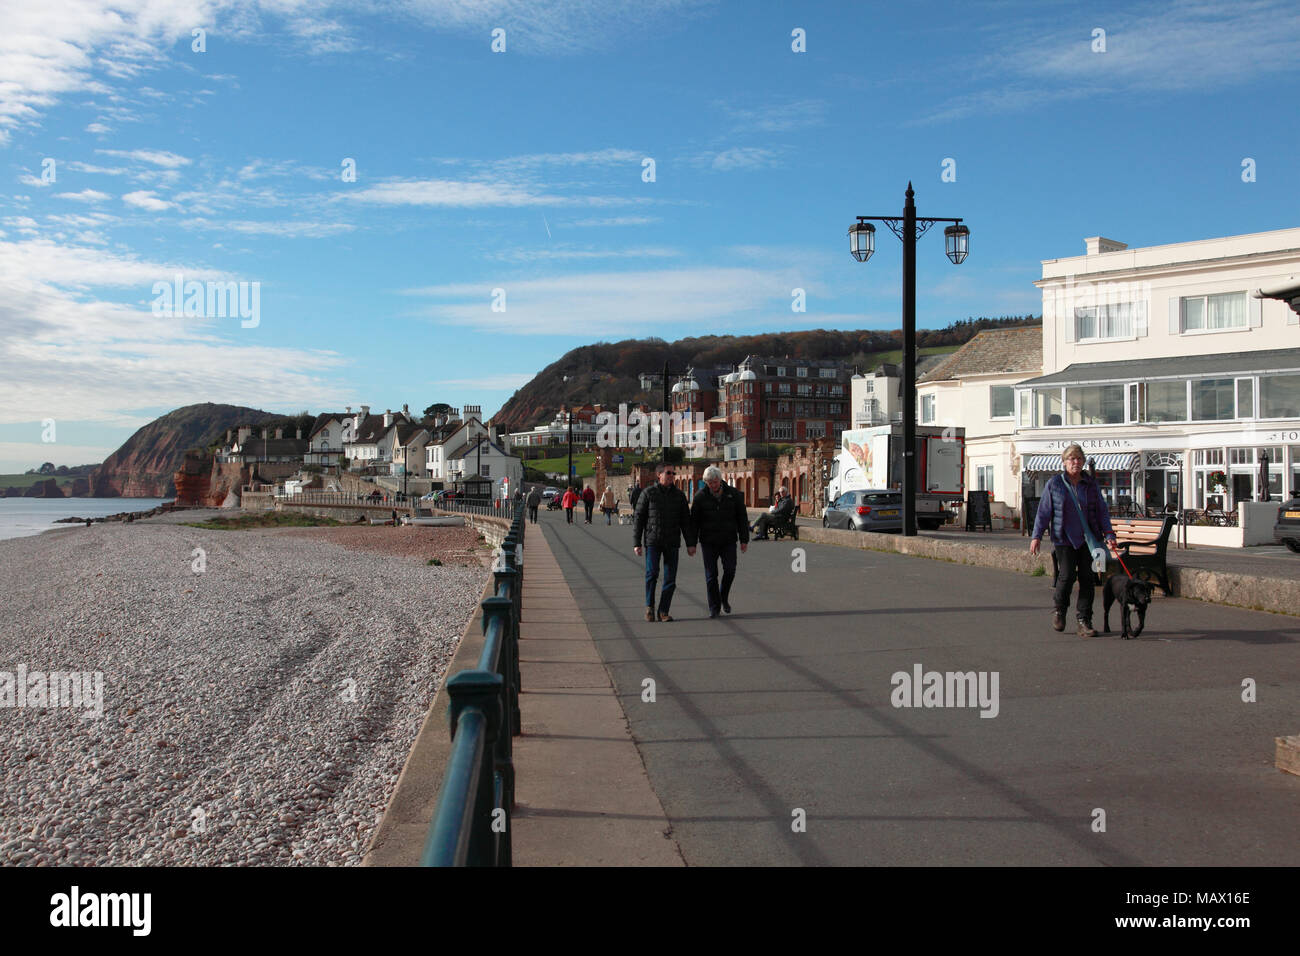 The promenade and beach at Sidmouth, Devon in late November, looking west Stock Photo